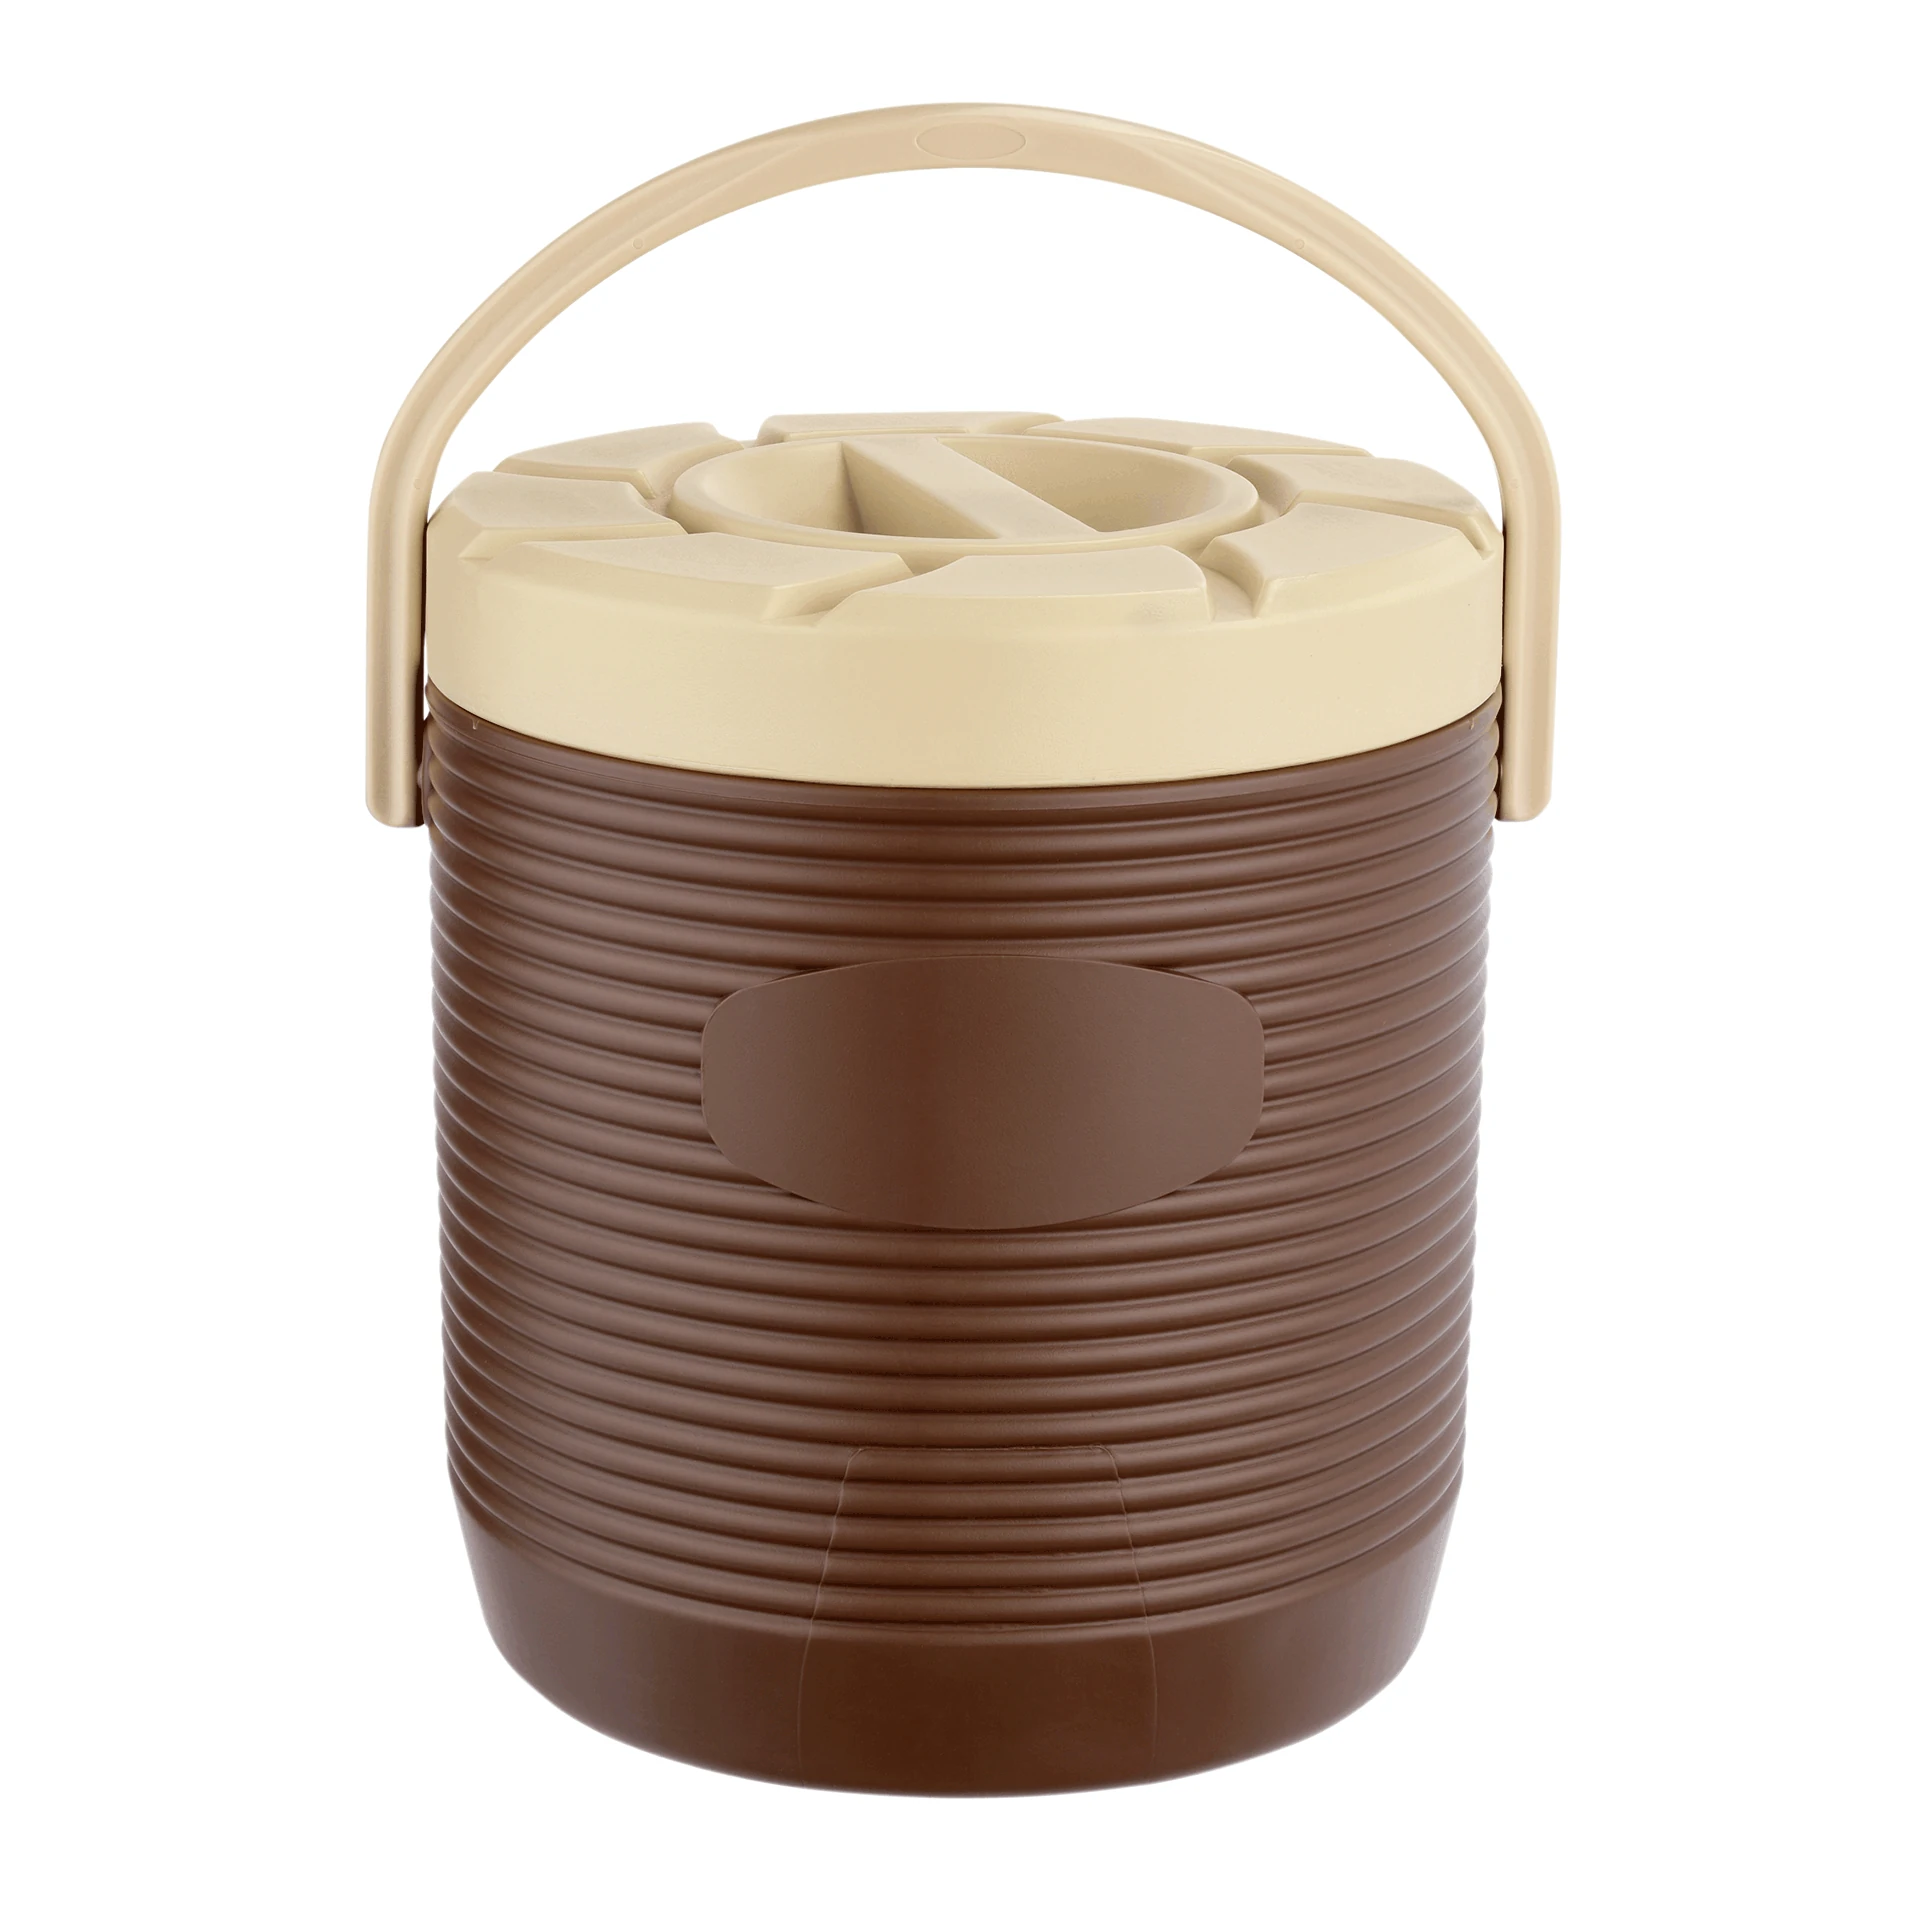 Insulated food transport container Brown